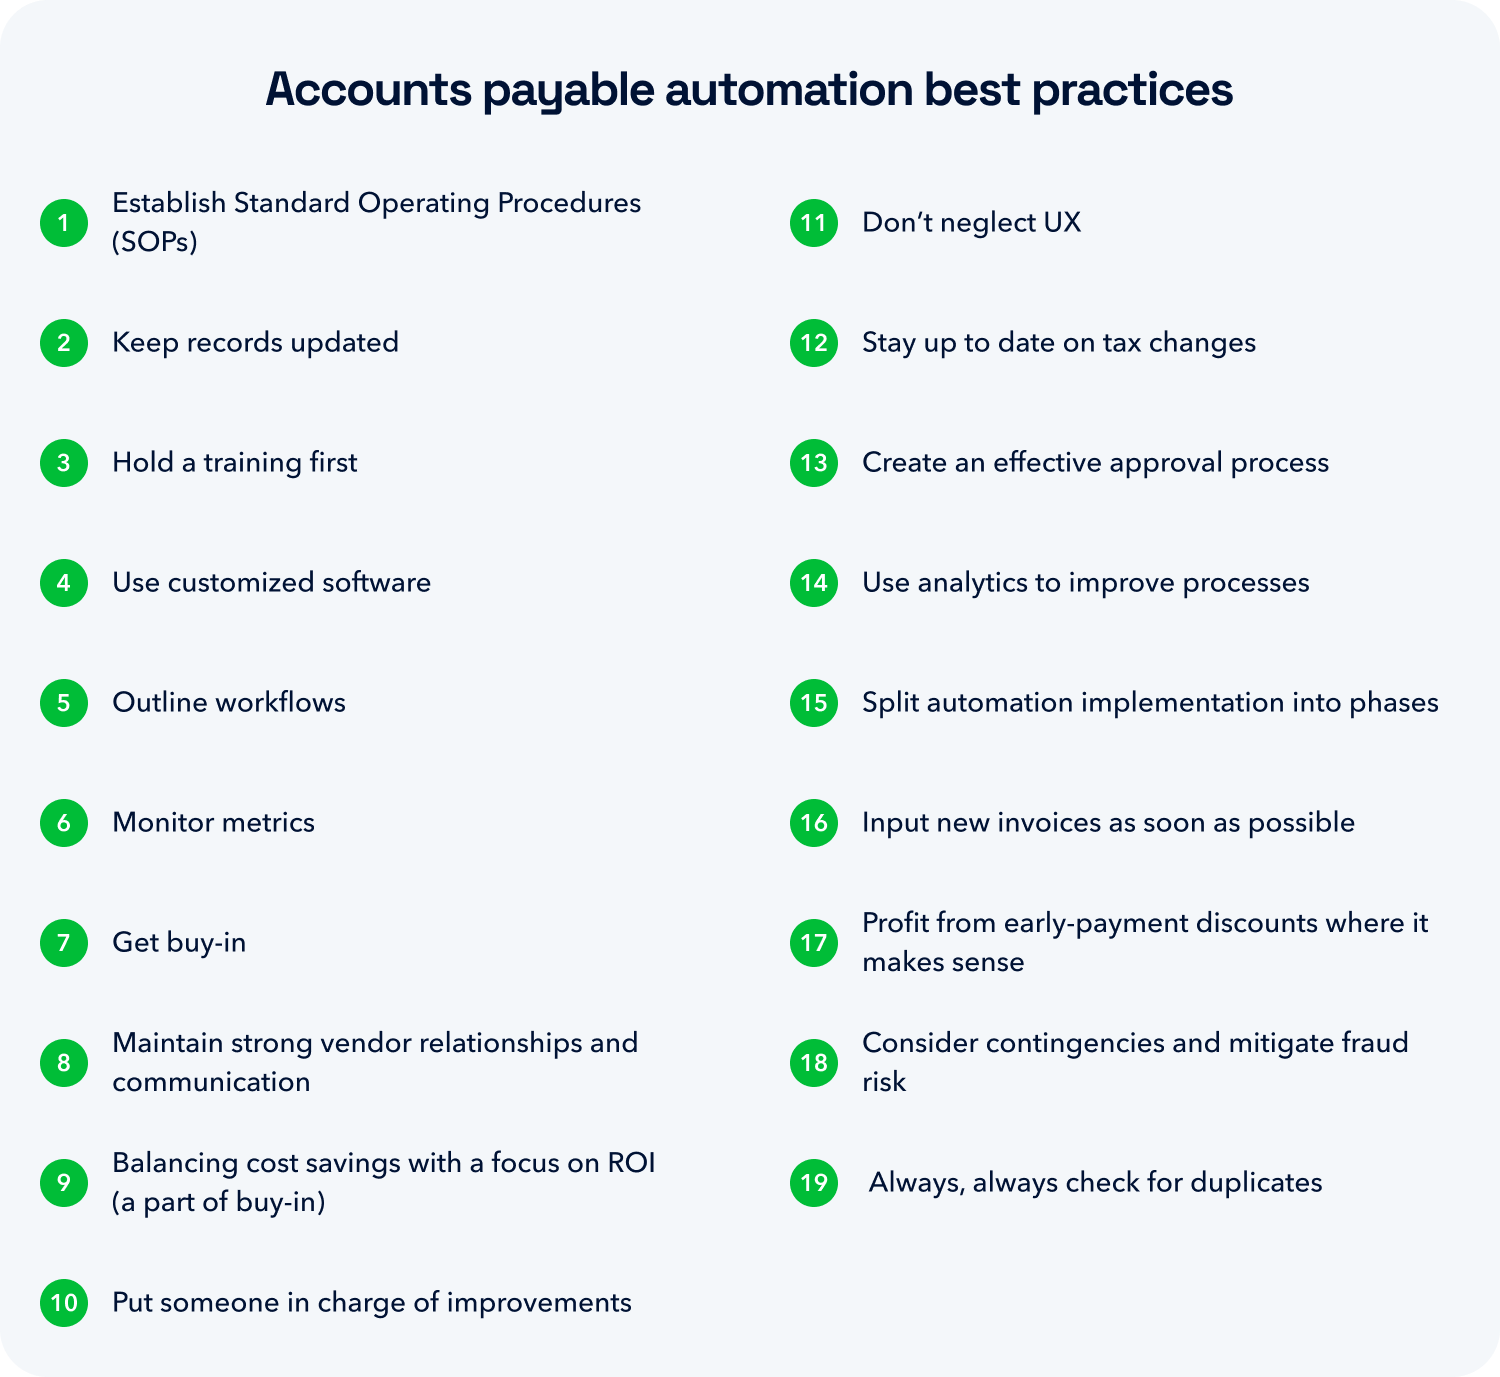 Listing out the 19 accounts payable automation best practices delineated in this article.